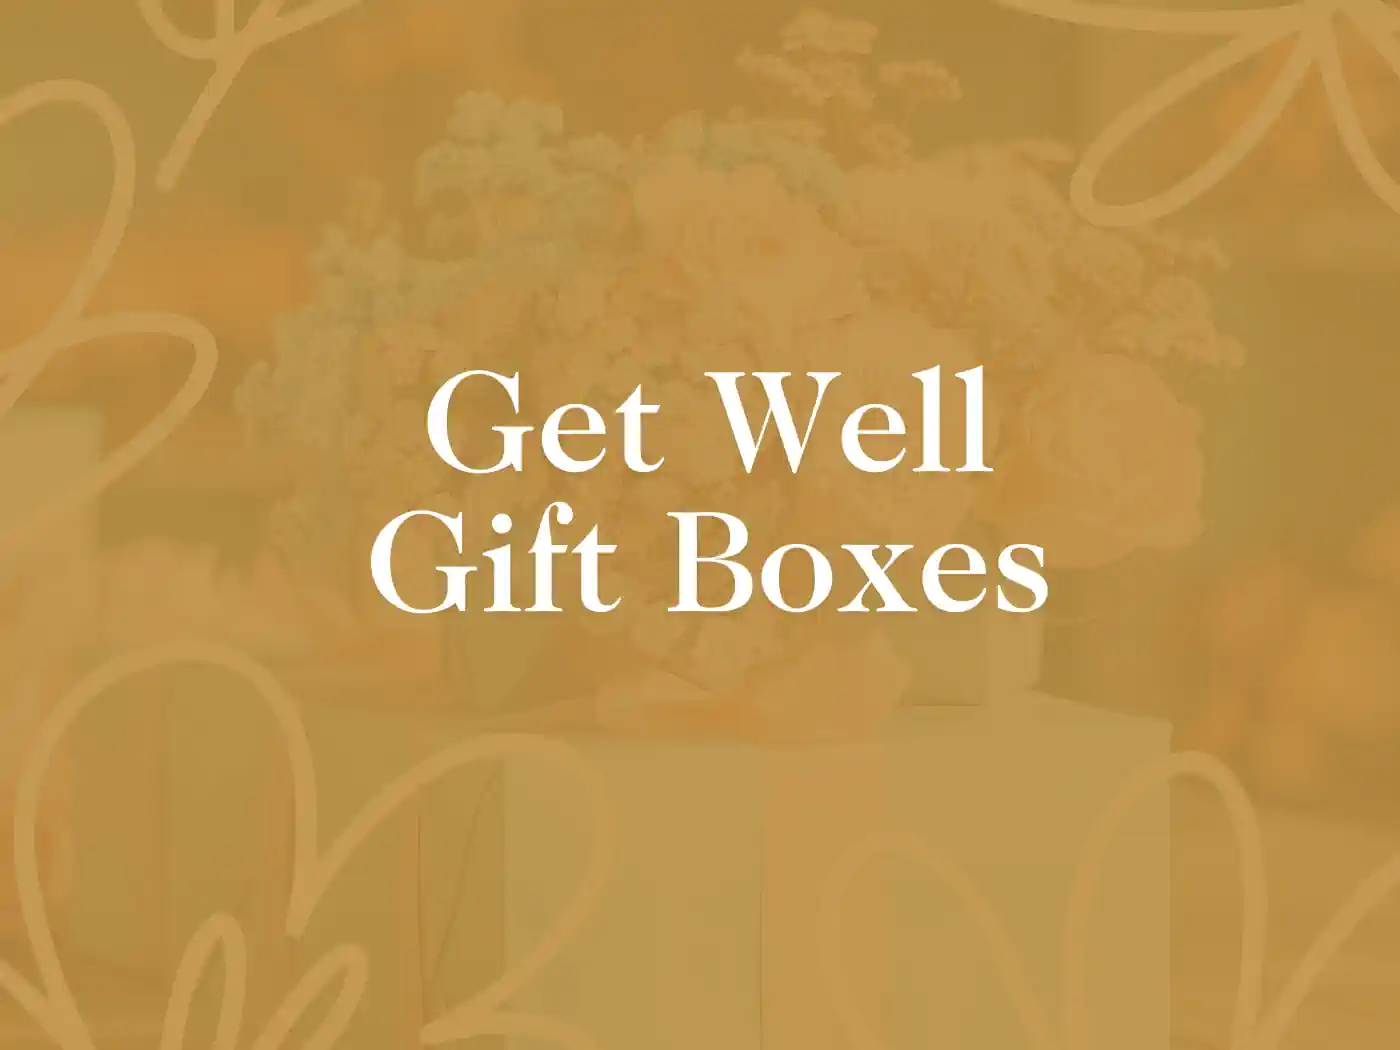 Alt tag: "Promotional image with 'Get Well Gift Boxes' text, featuring a blurred background of a floral arrangement in warm tones, symbolizing care and comfort. Delivered with Heart. Fabulous Flowers and Gifts.